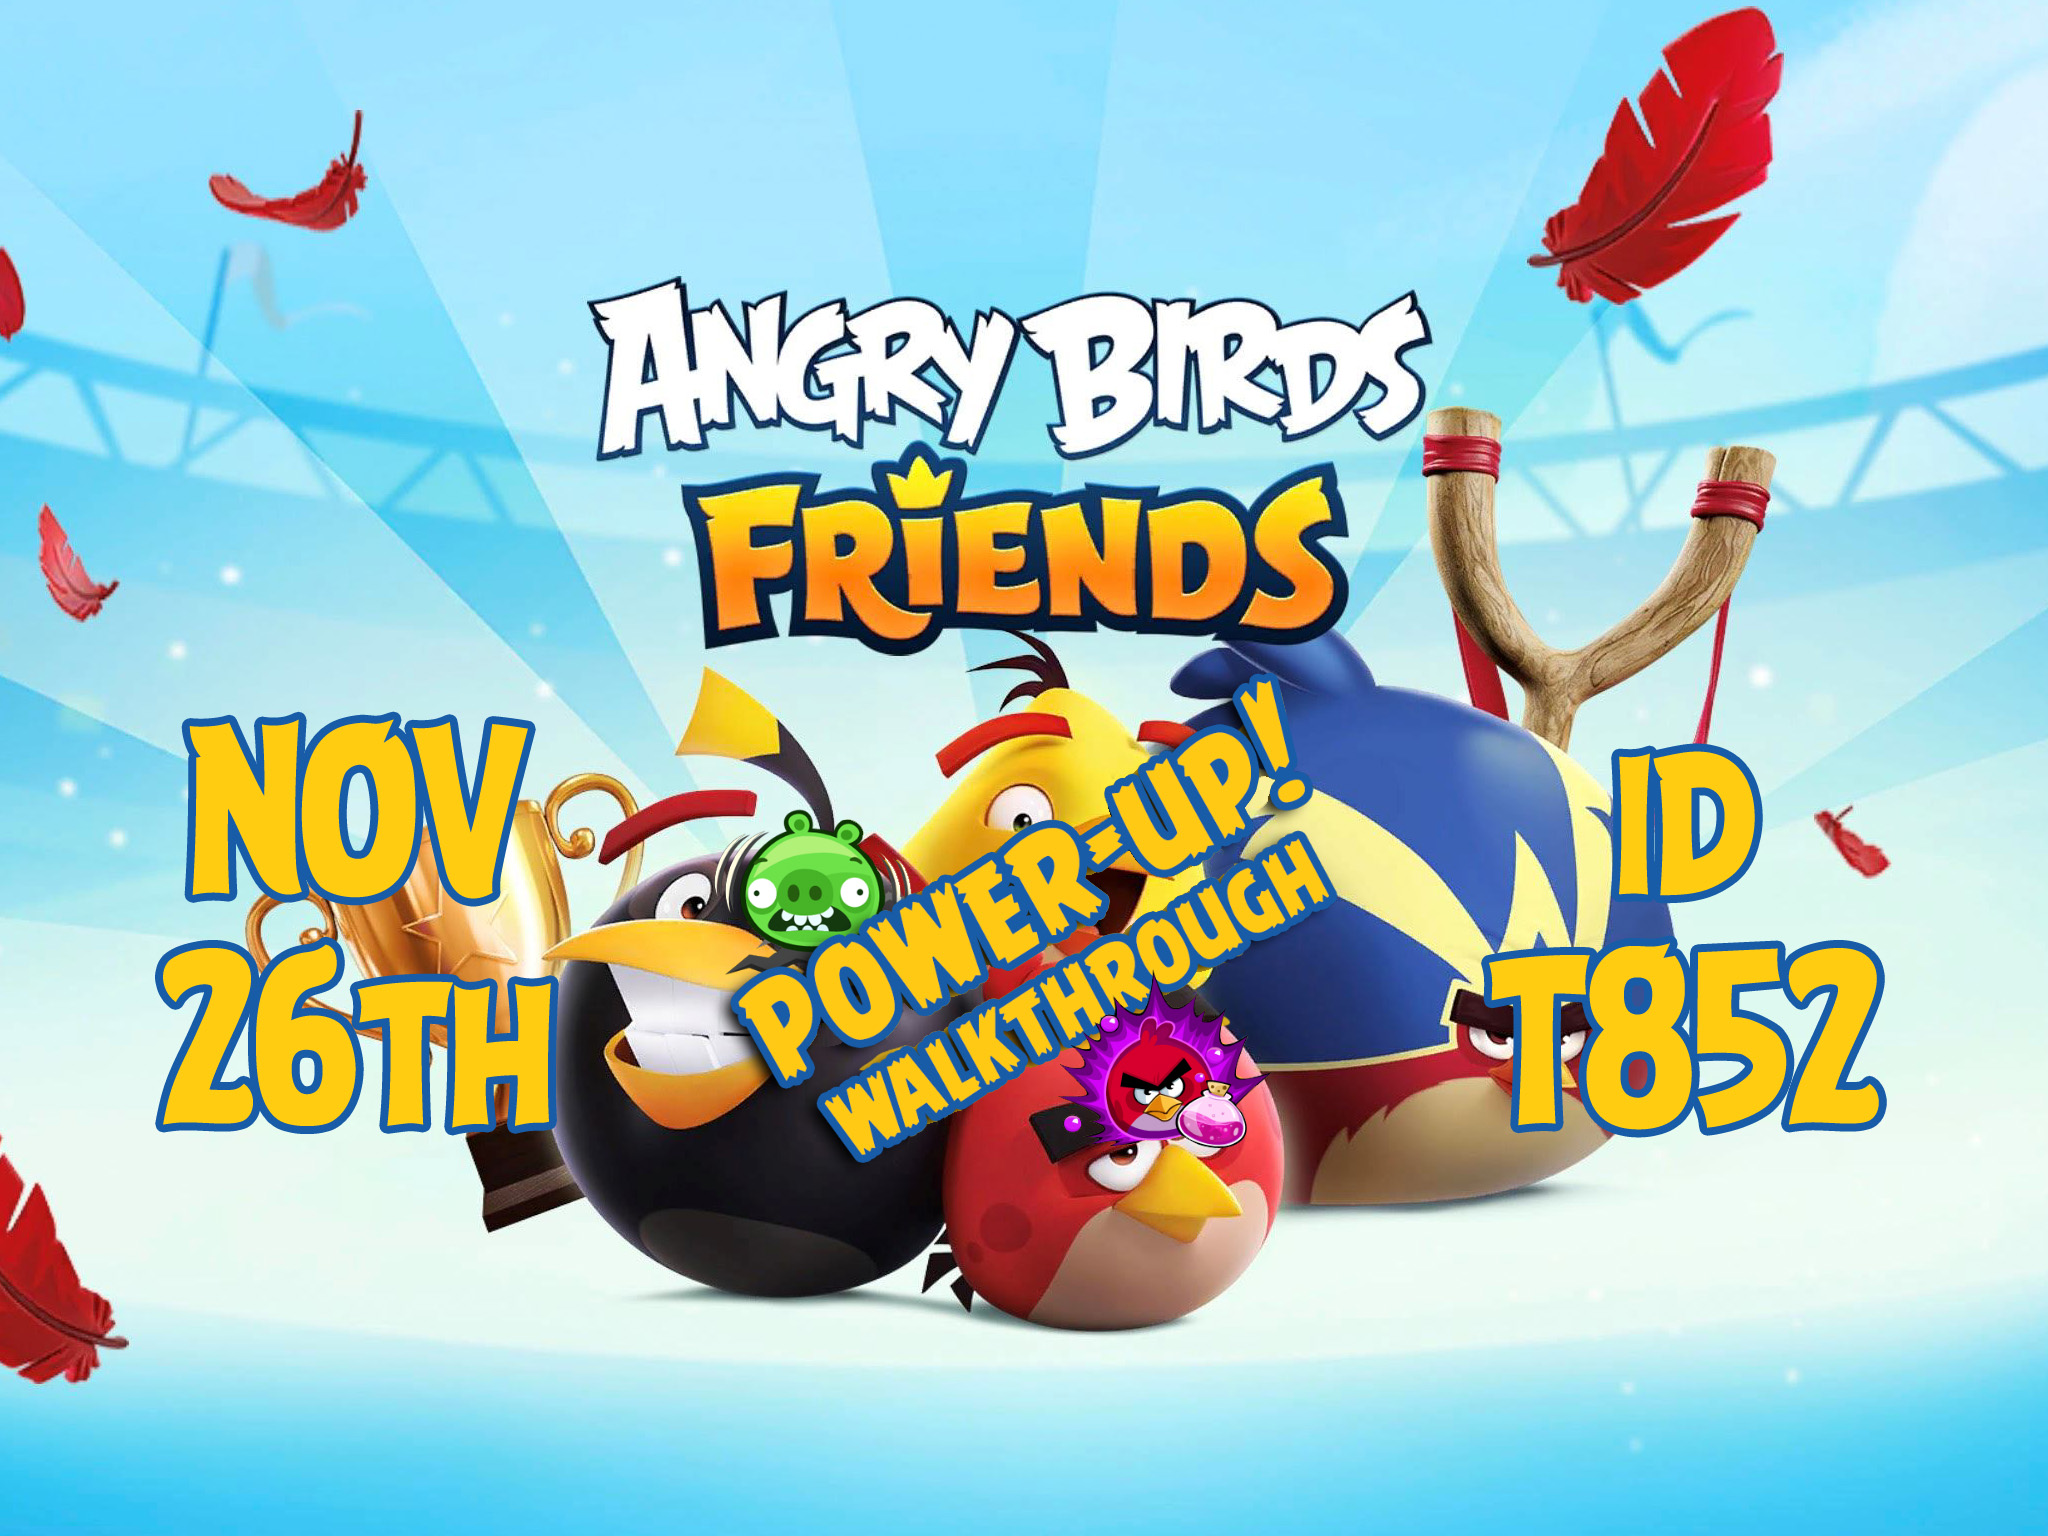 Angry-Birds-Friends-Tournament-T852-Feature-Image-PU